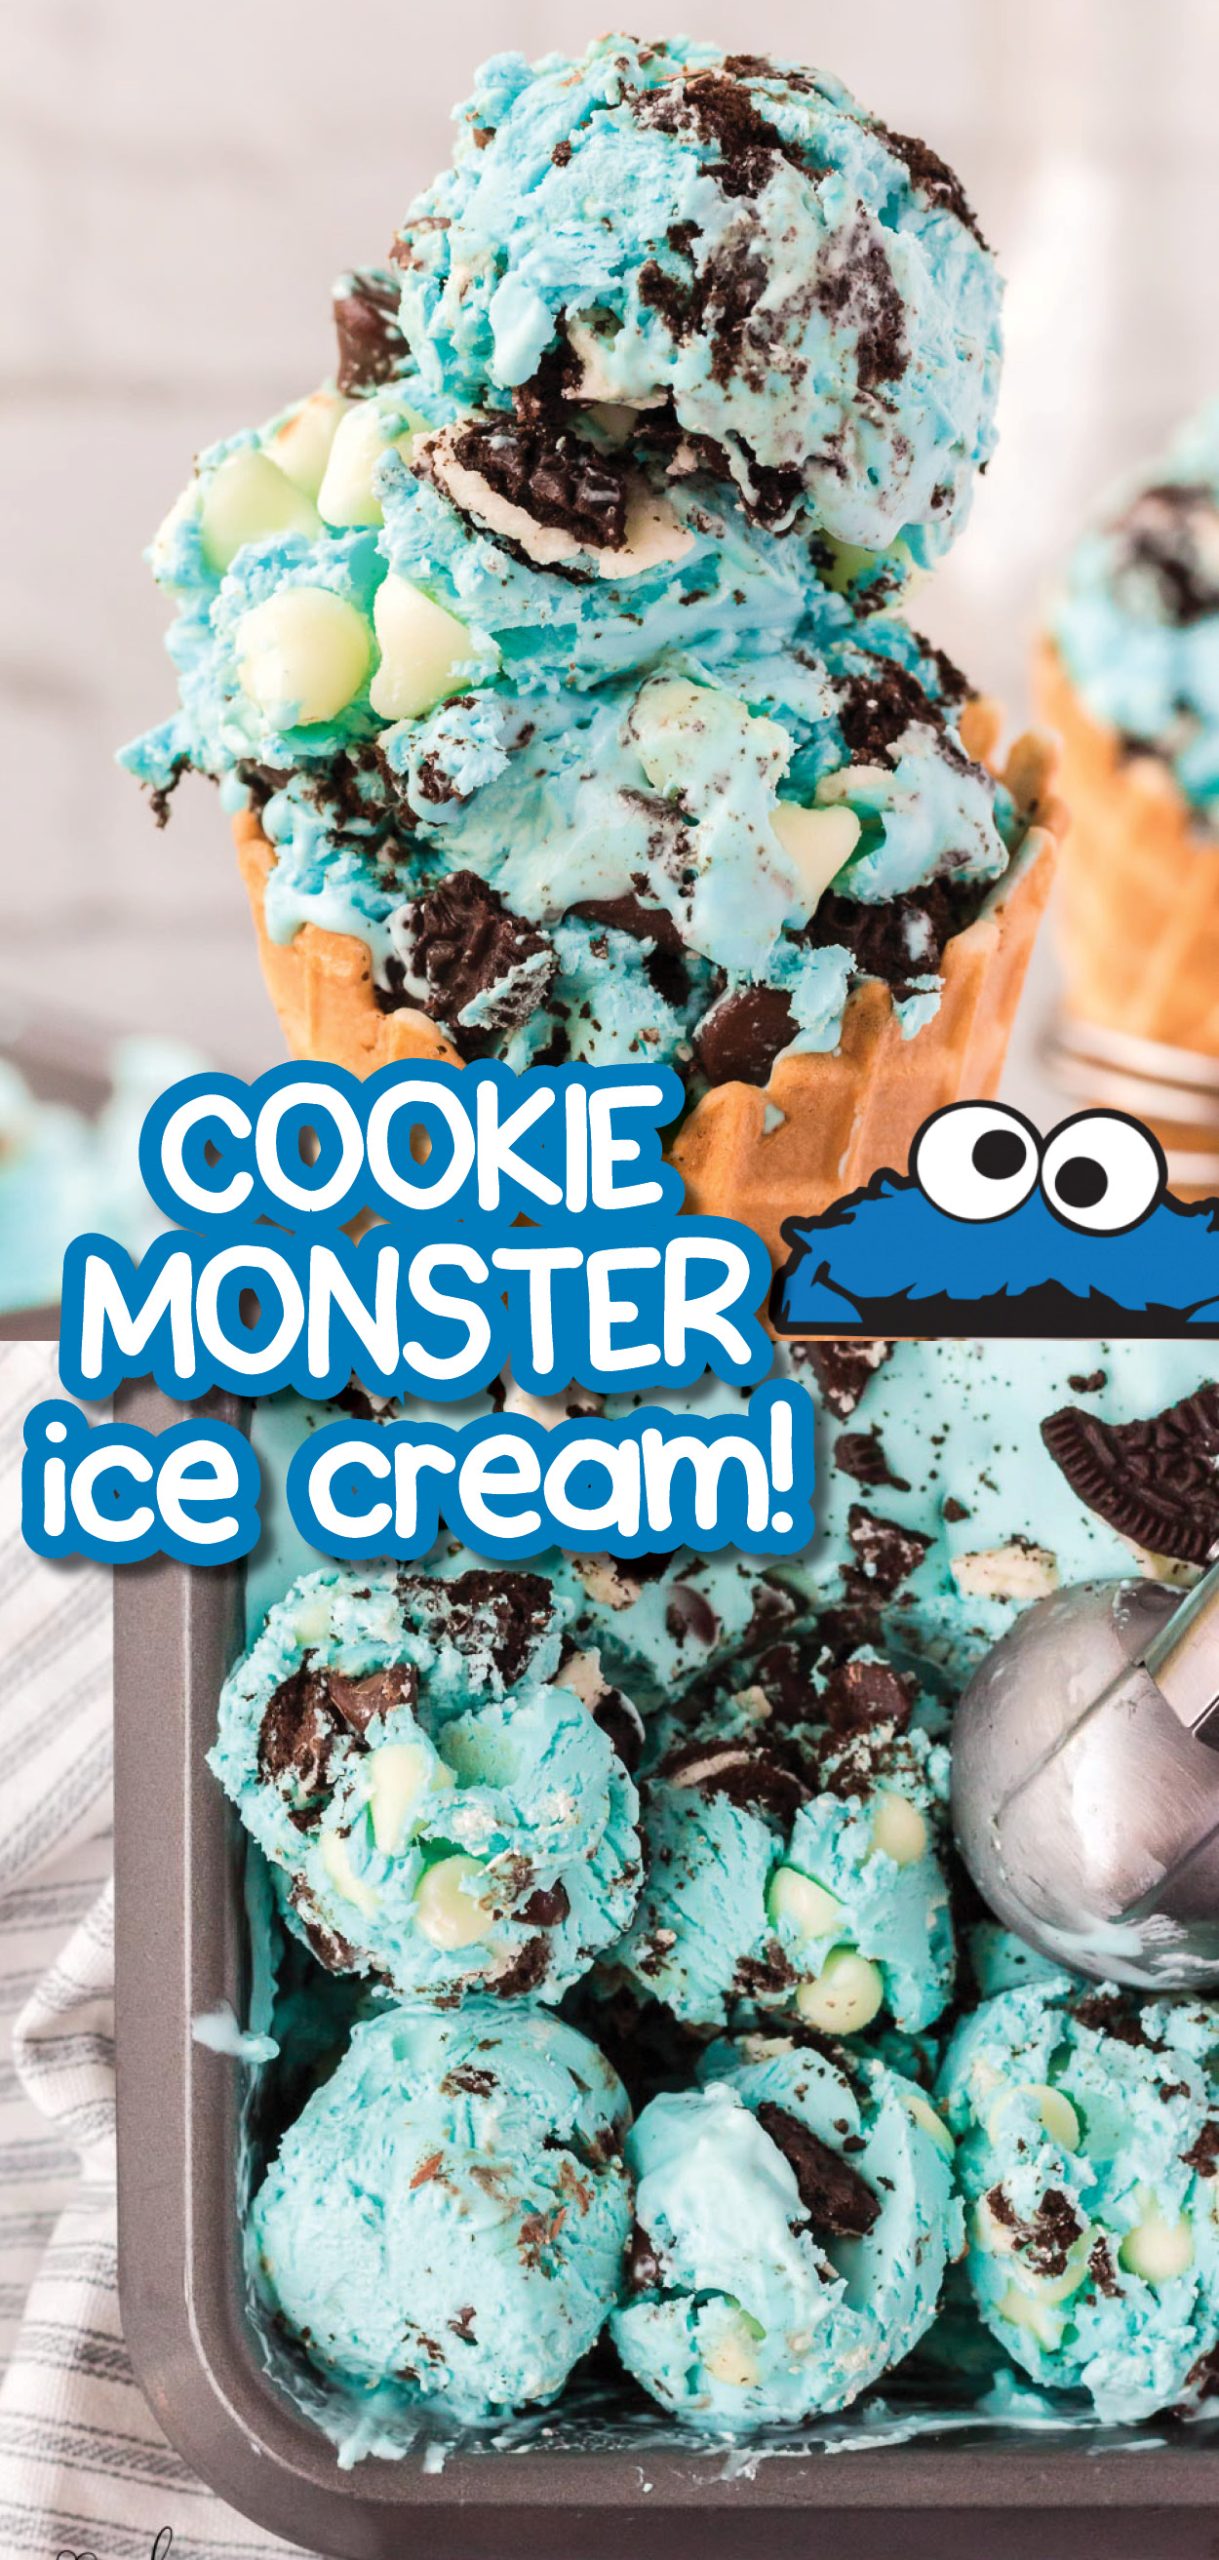 The Cookie Monster Ice Cream recipe is a cookie lover’s dream! This cold, vanilla, creamy ice cream is turned blue just, for fun, and loaded with cookies and chocolate chips!